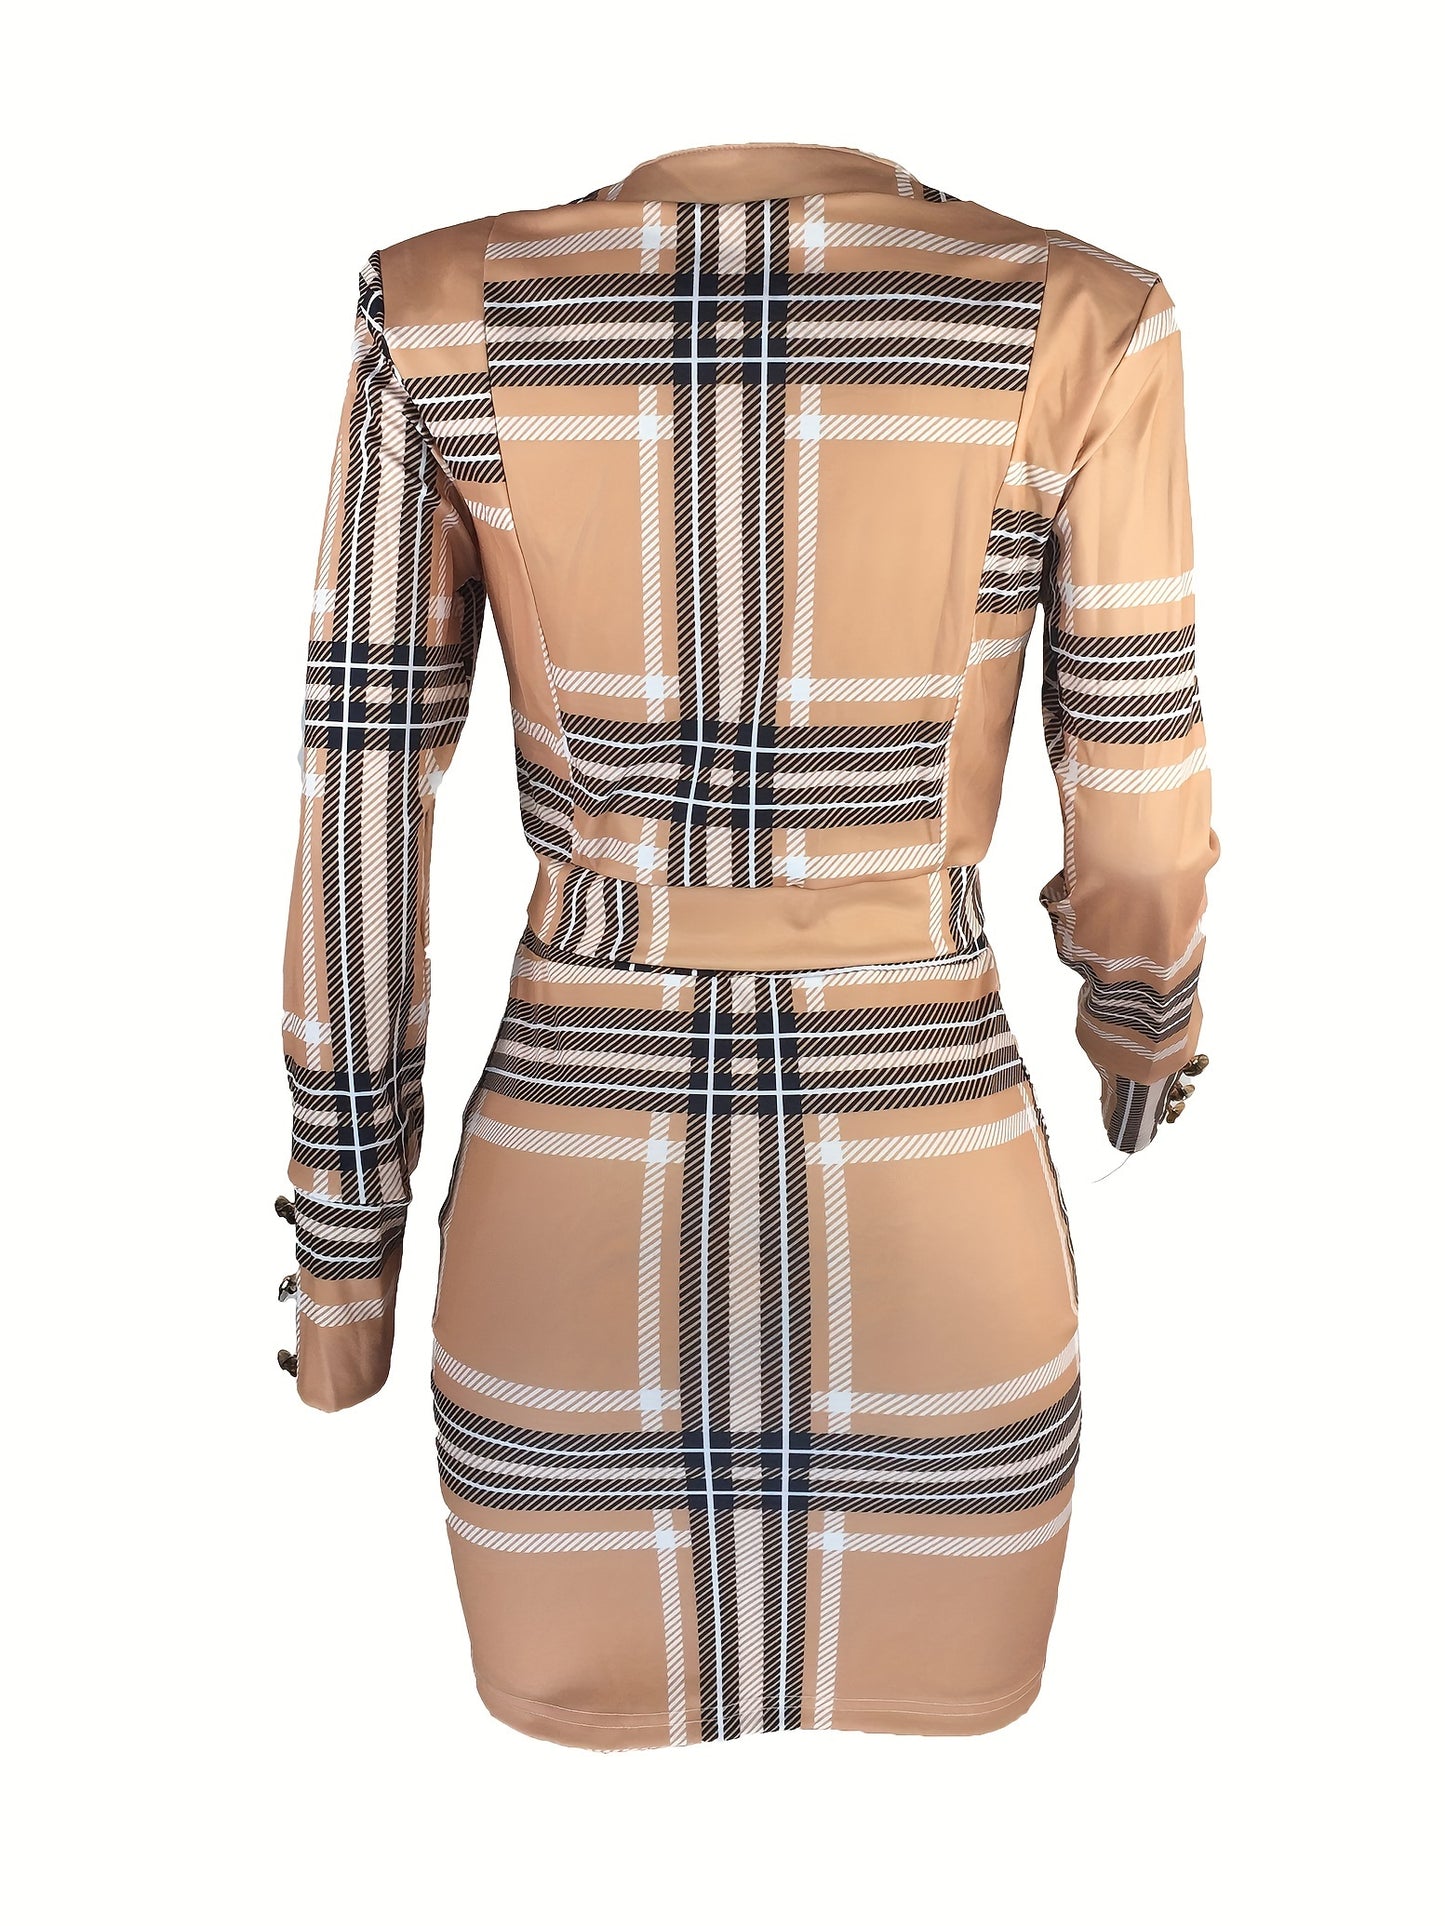 Antmvs Houndstooth Print Elegant Two-piece Set, Button Front Long Sleeve Tops & Bag Hip Mini Skirts Outfits, Women's Clothing